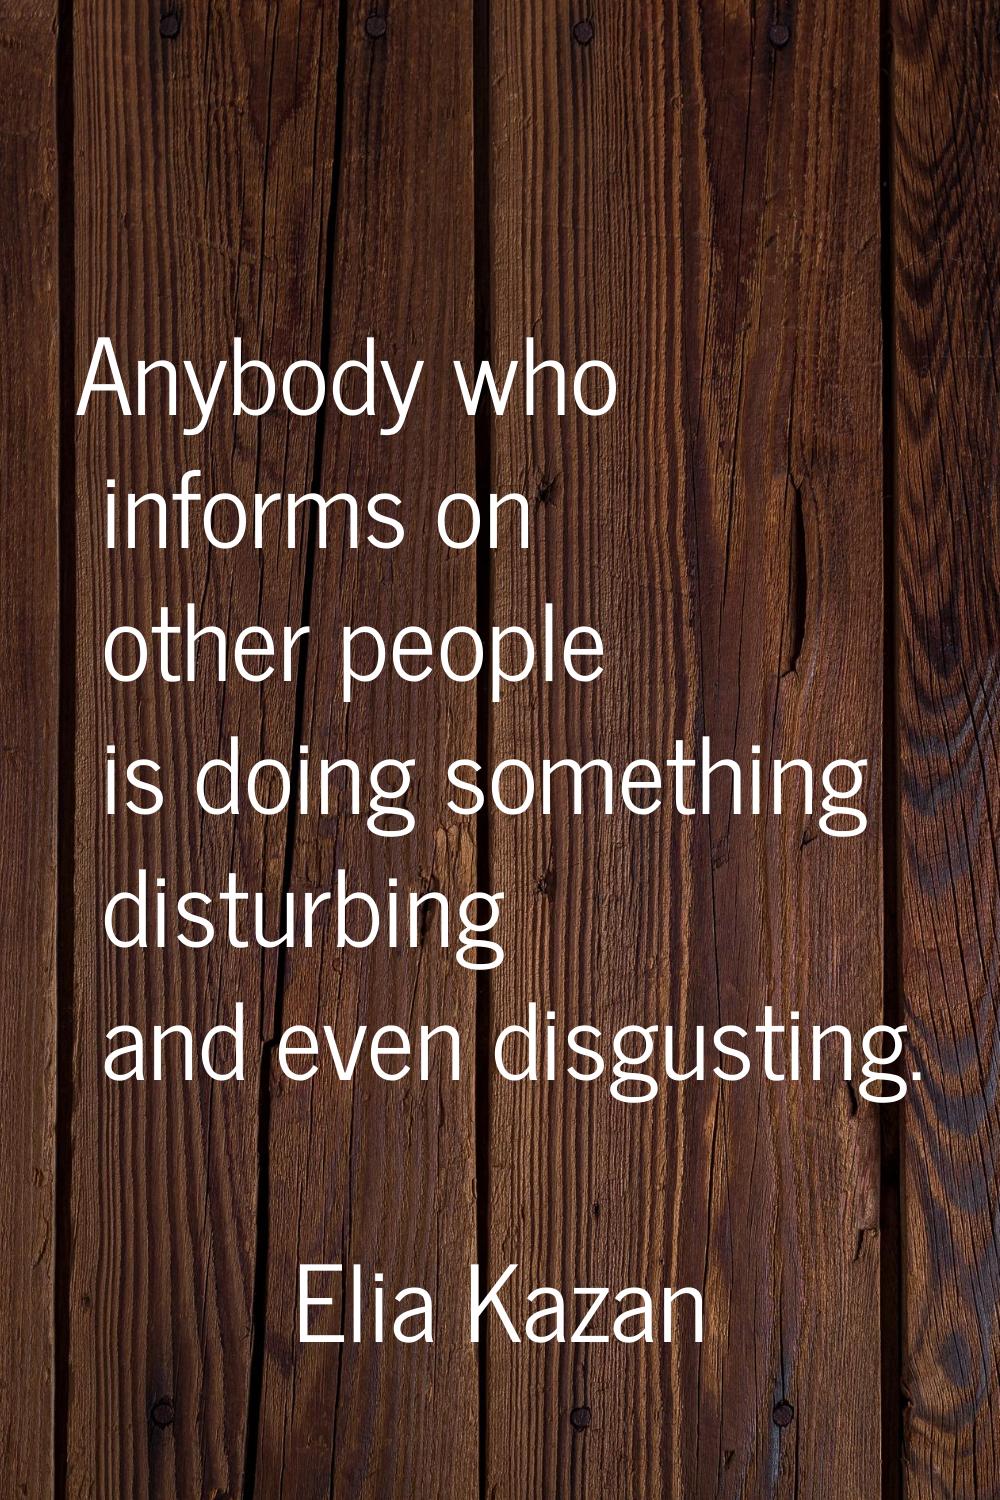 Anybody who informs on other people is doing something disturbing and even disgusting.